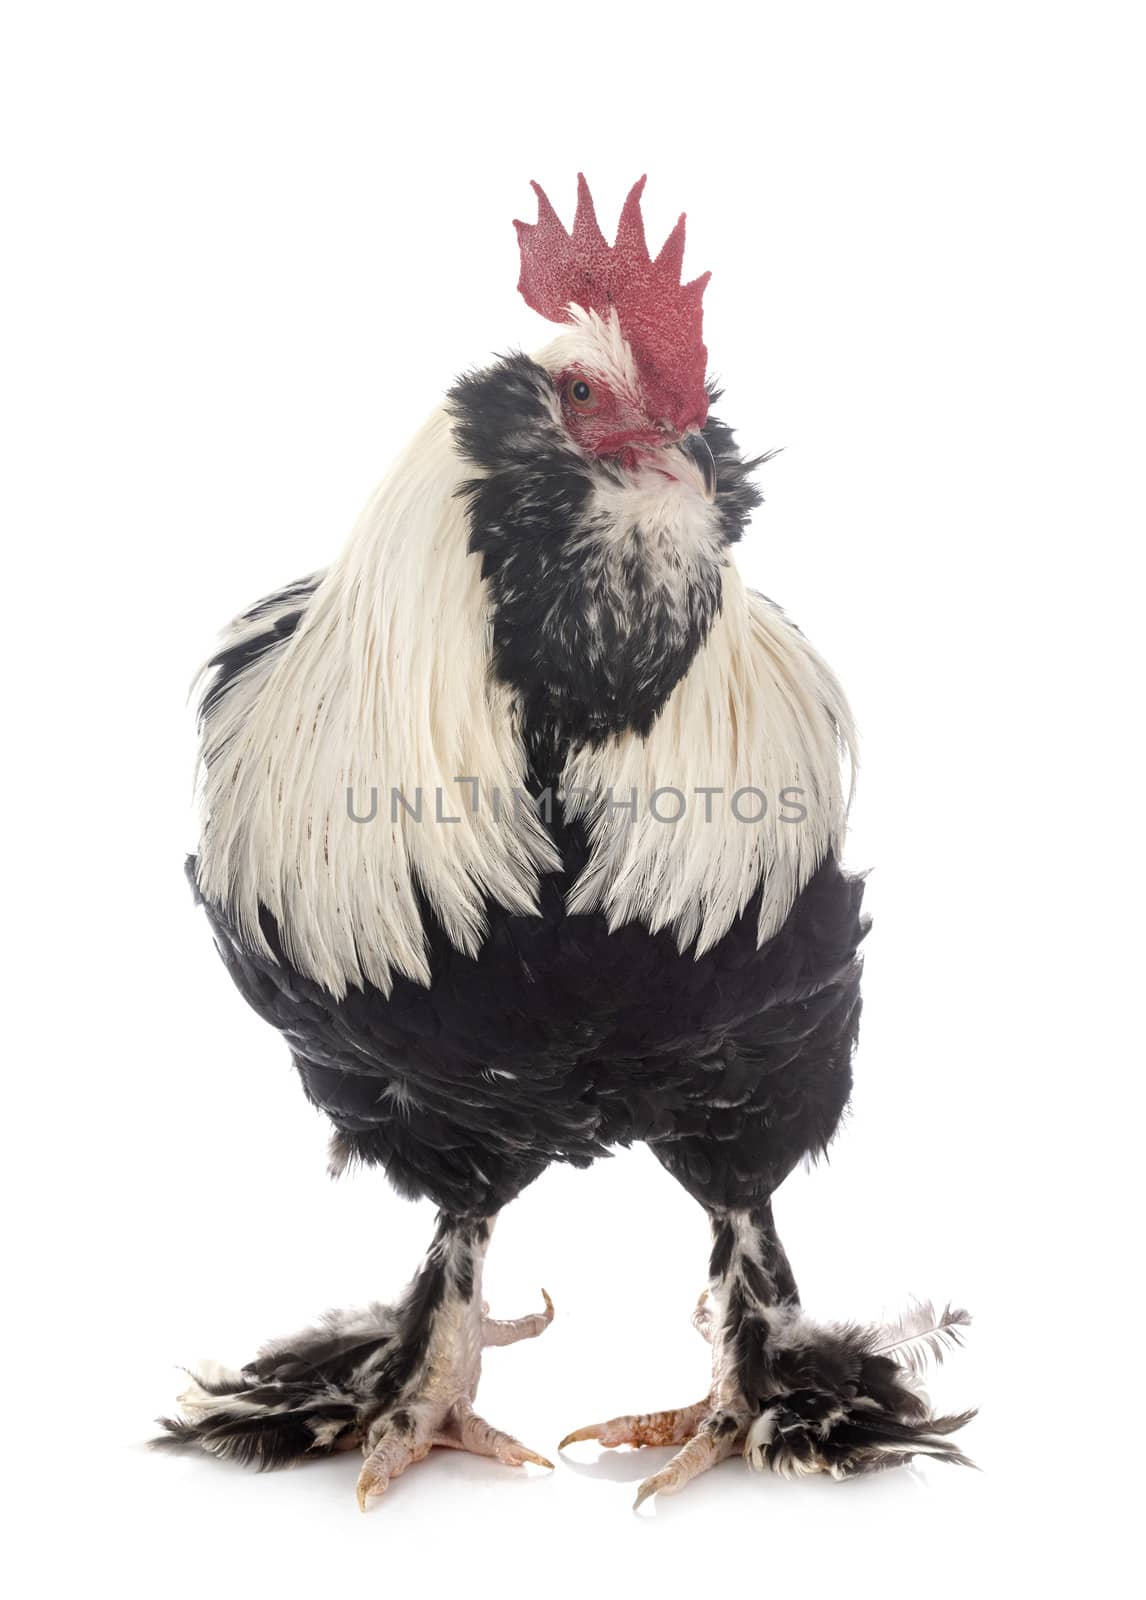 Faverolles rooster in studio by cynoclub